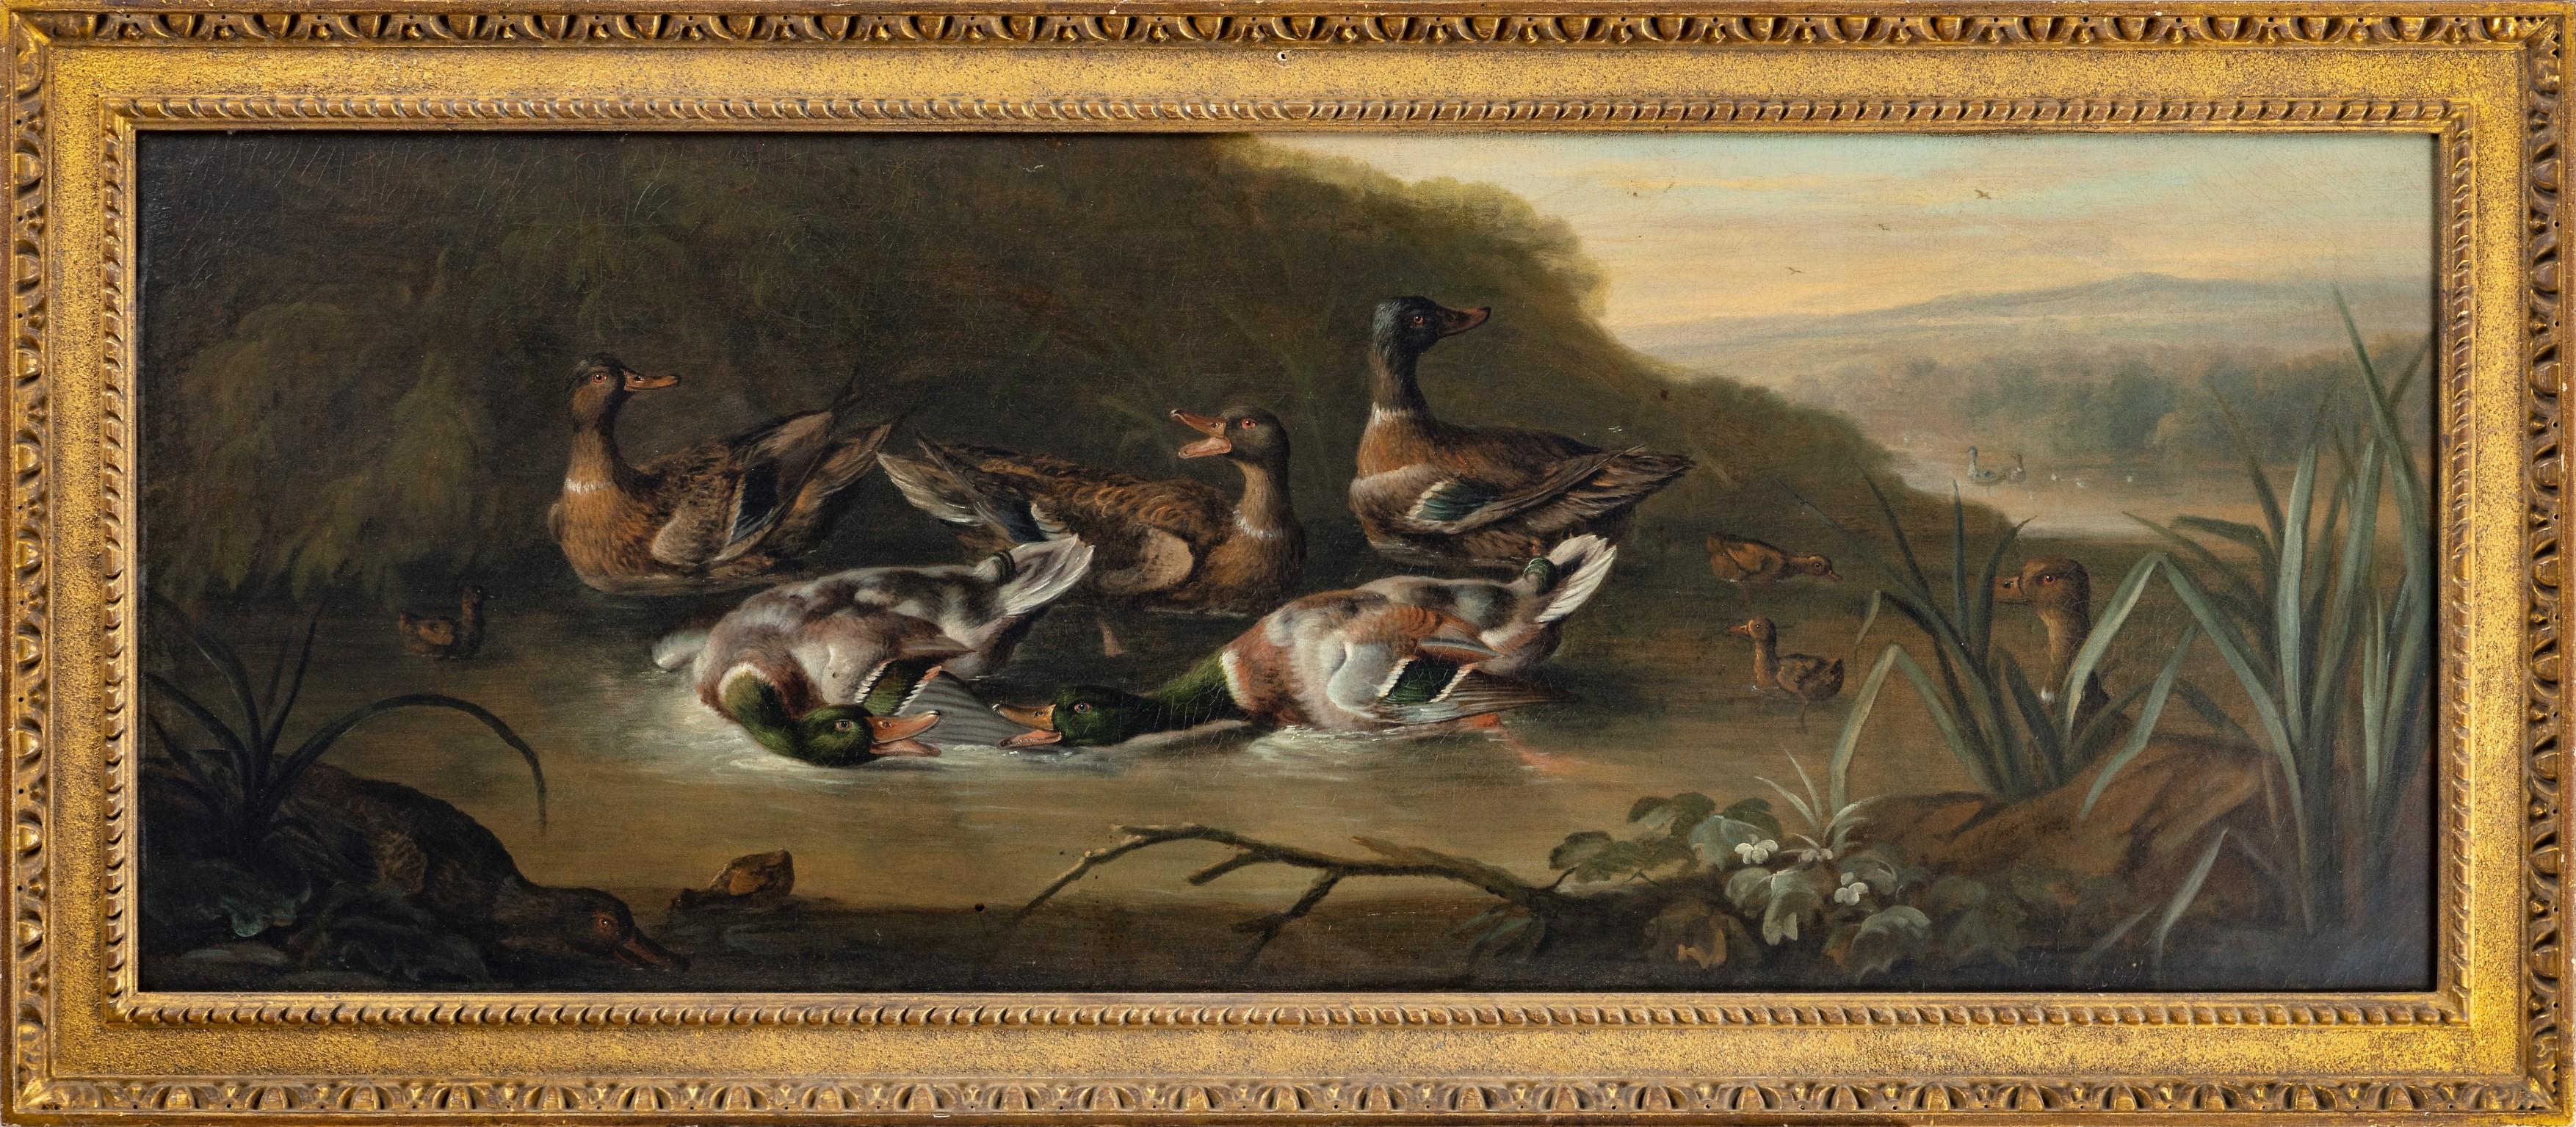 George William Sartorius Animal Painting - Mallard Drakes with Ducks and Ducklings in a Stream by Sartorius